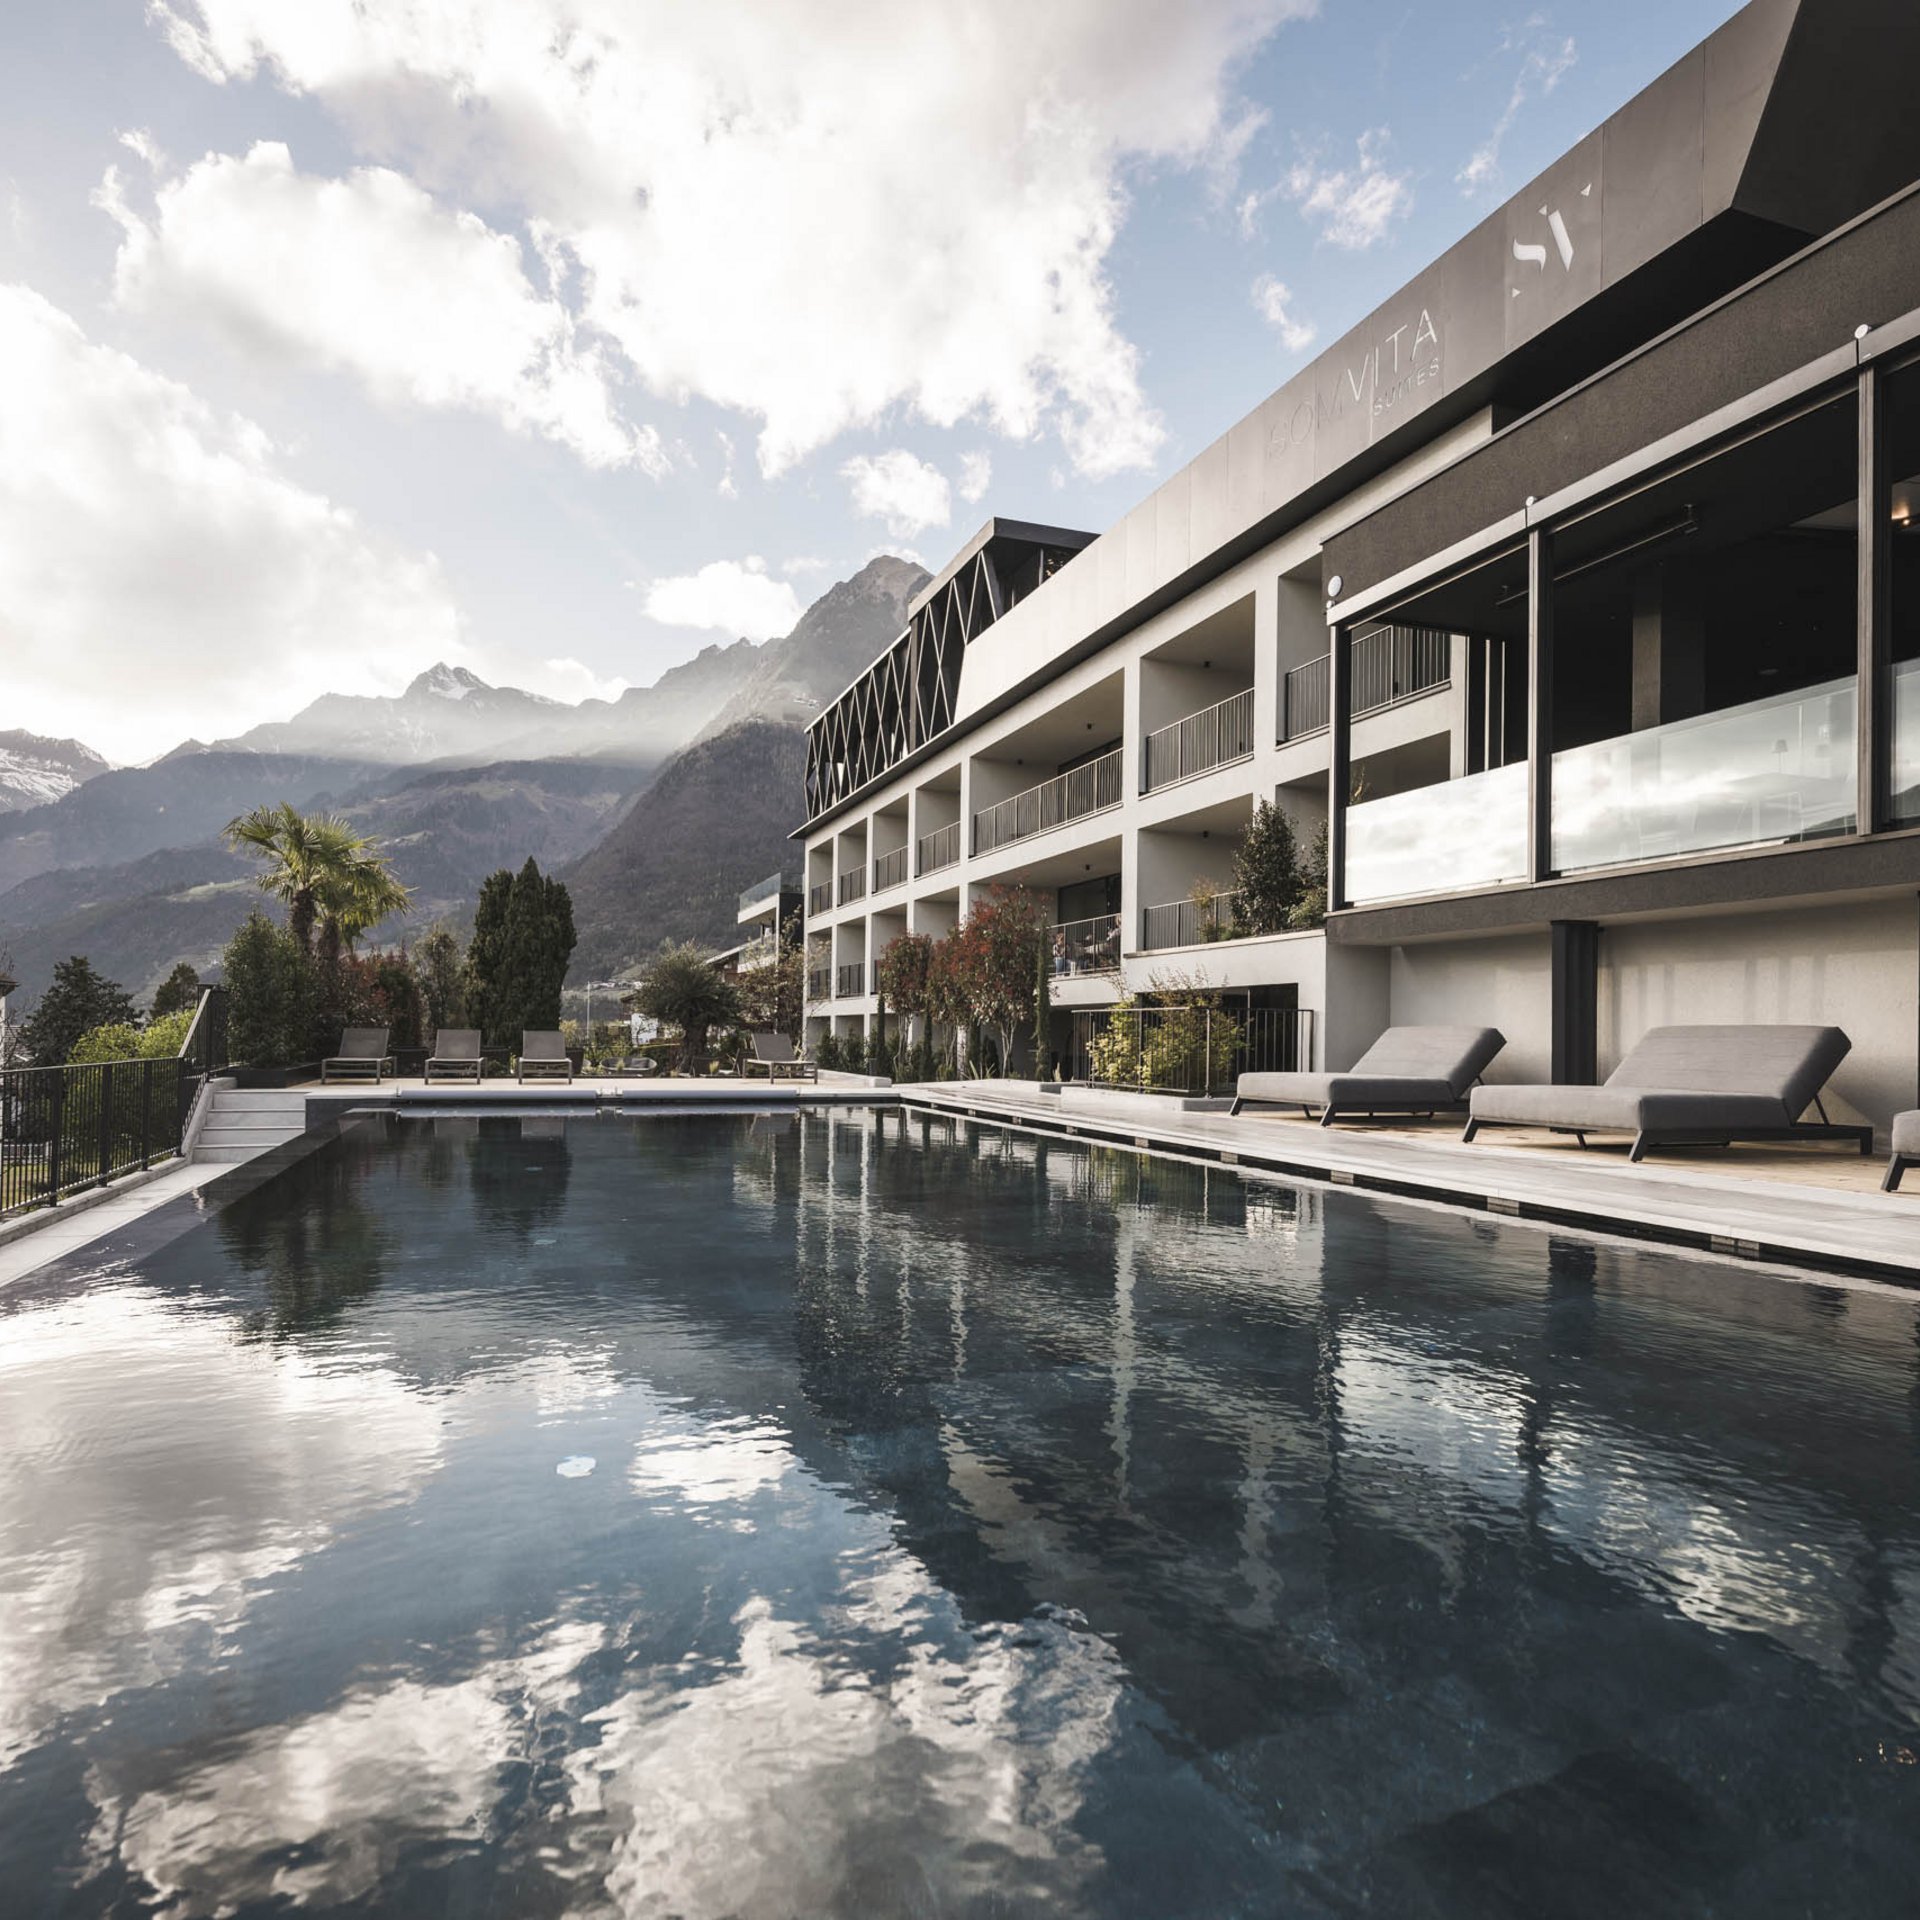 In the middle of Dorf Tirol, your accommodation with a pool